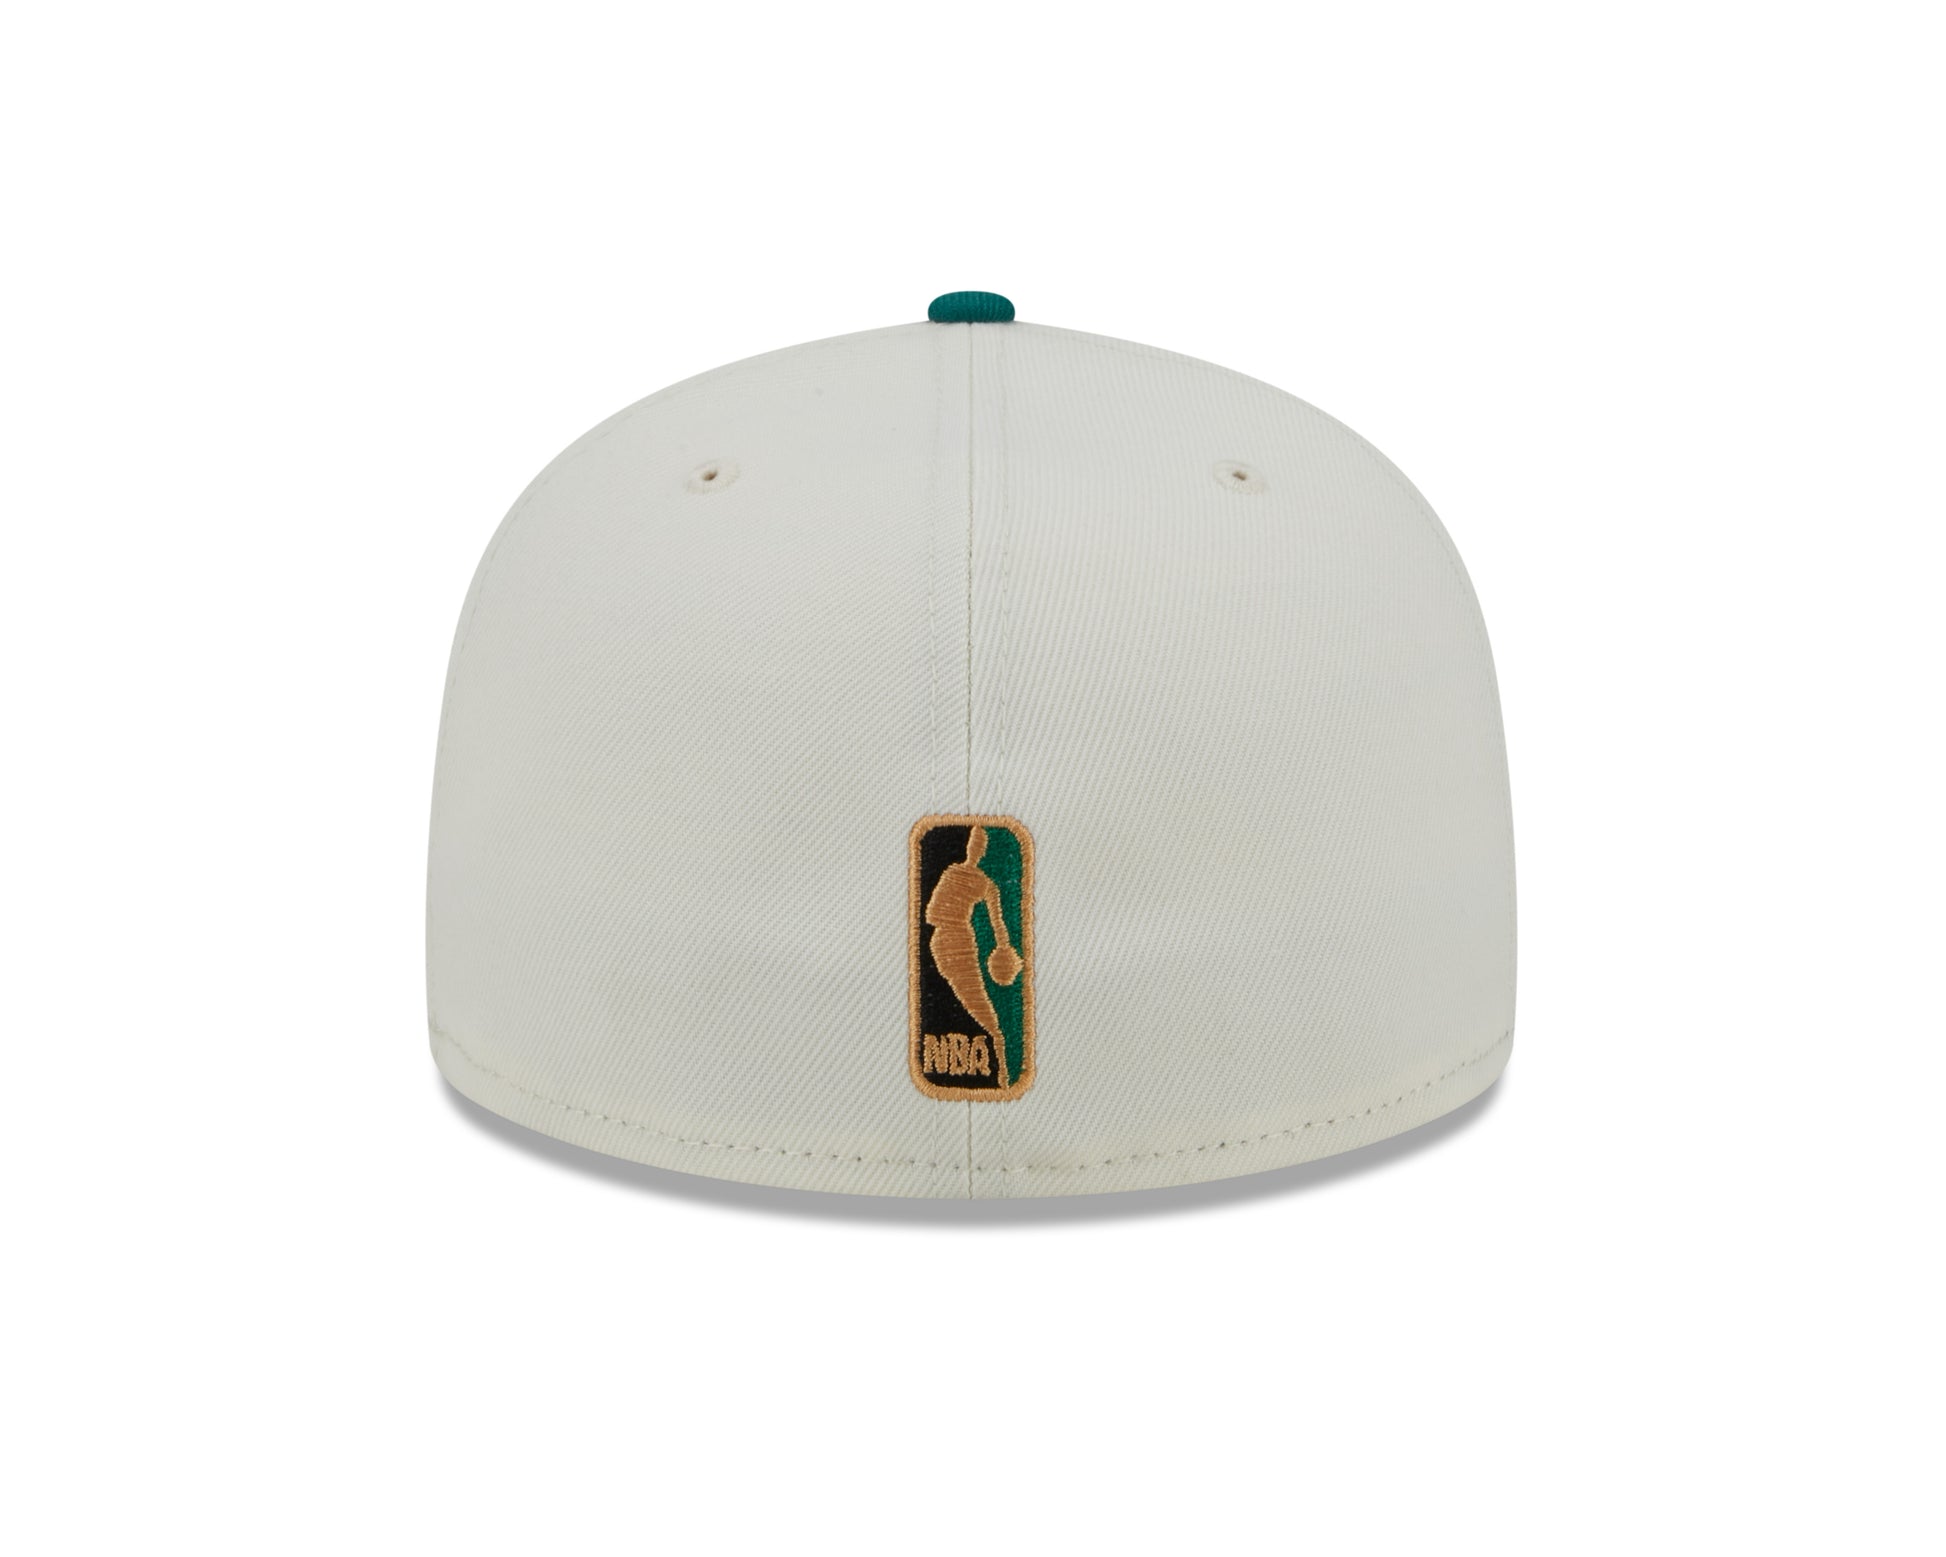 New Era - 59Fifty Fitted Cap - CAMP - Chicago Bulls - White/Green - Headz Up 